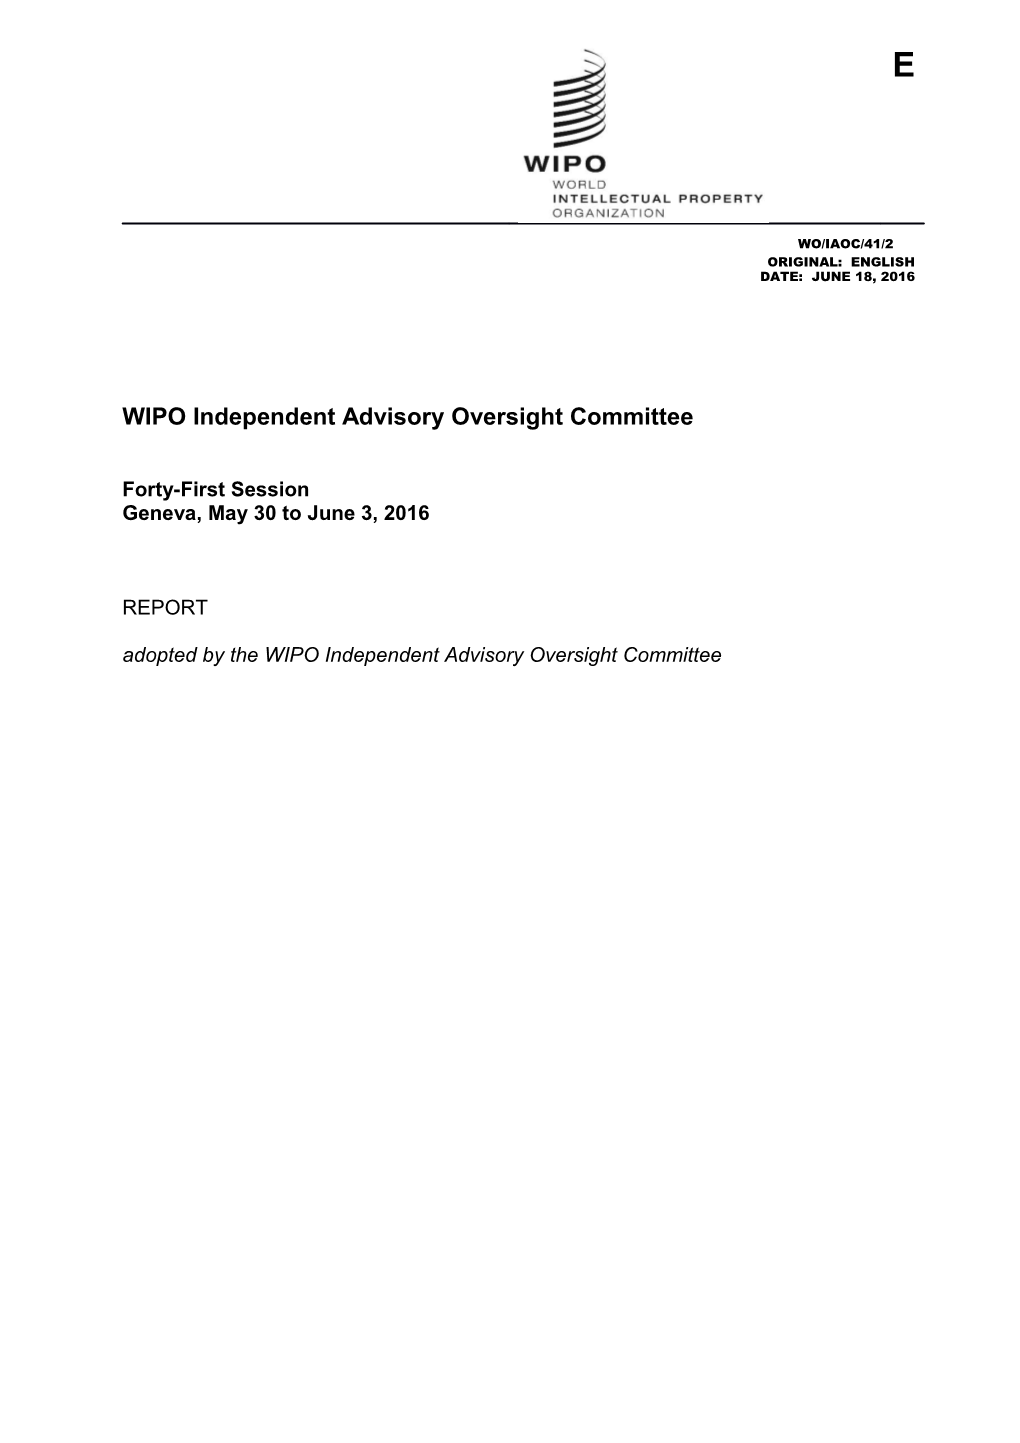 WIPO Independent Advisory Oversight Committee